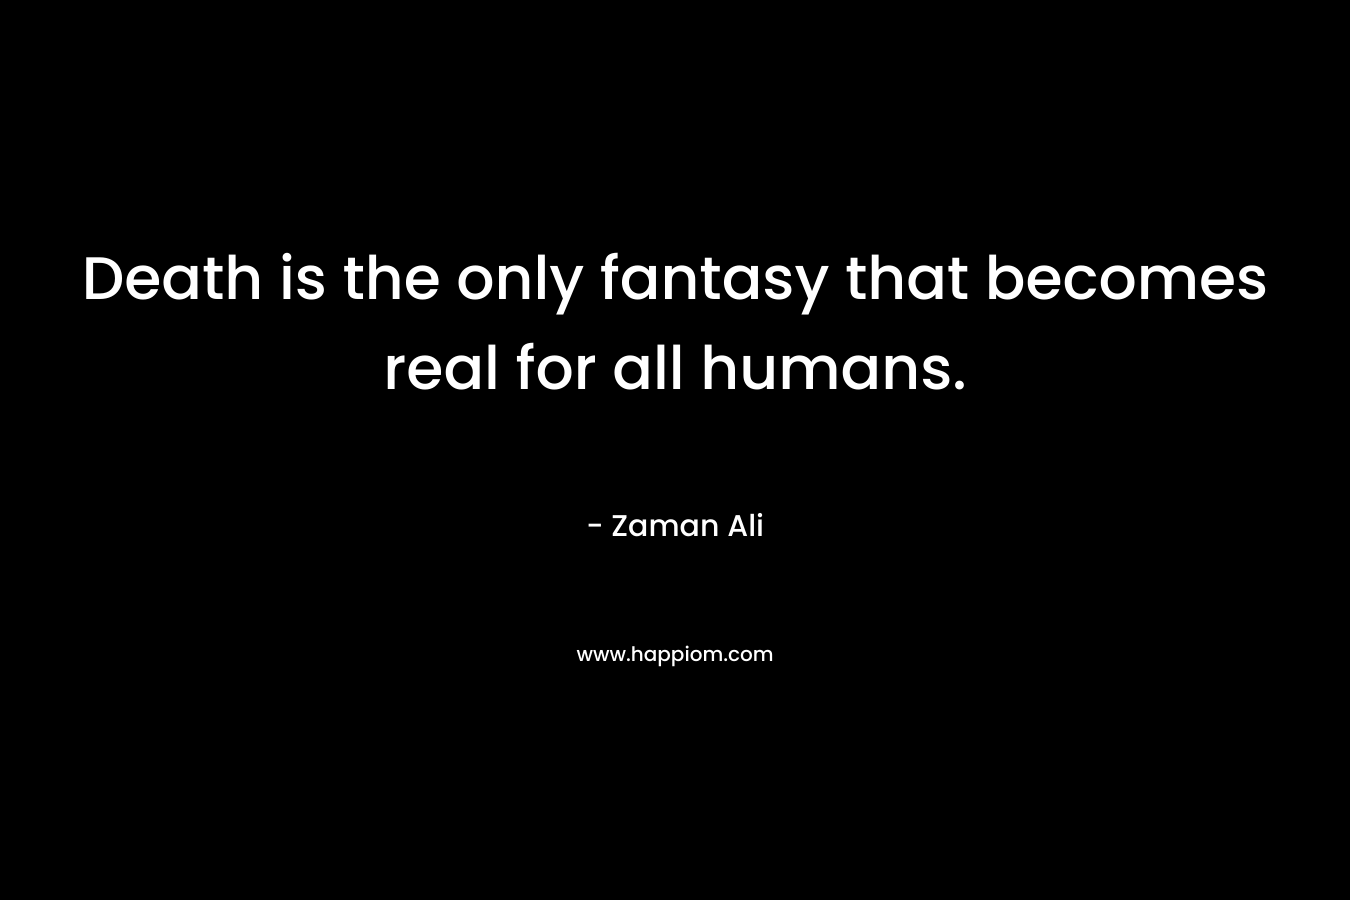 Death is the only fantasy that becomes real for all humans.